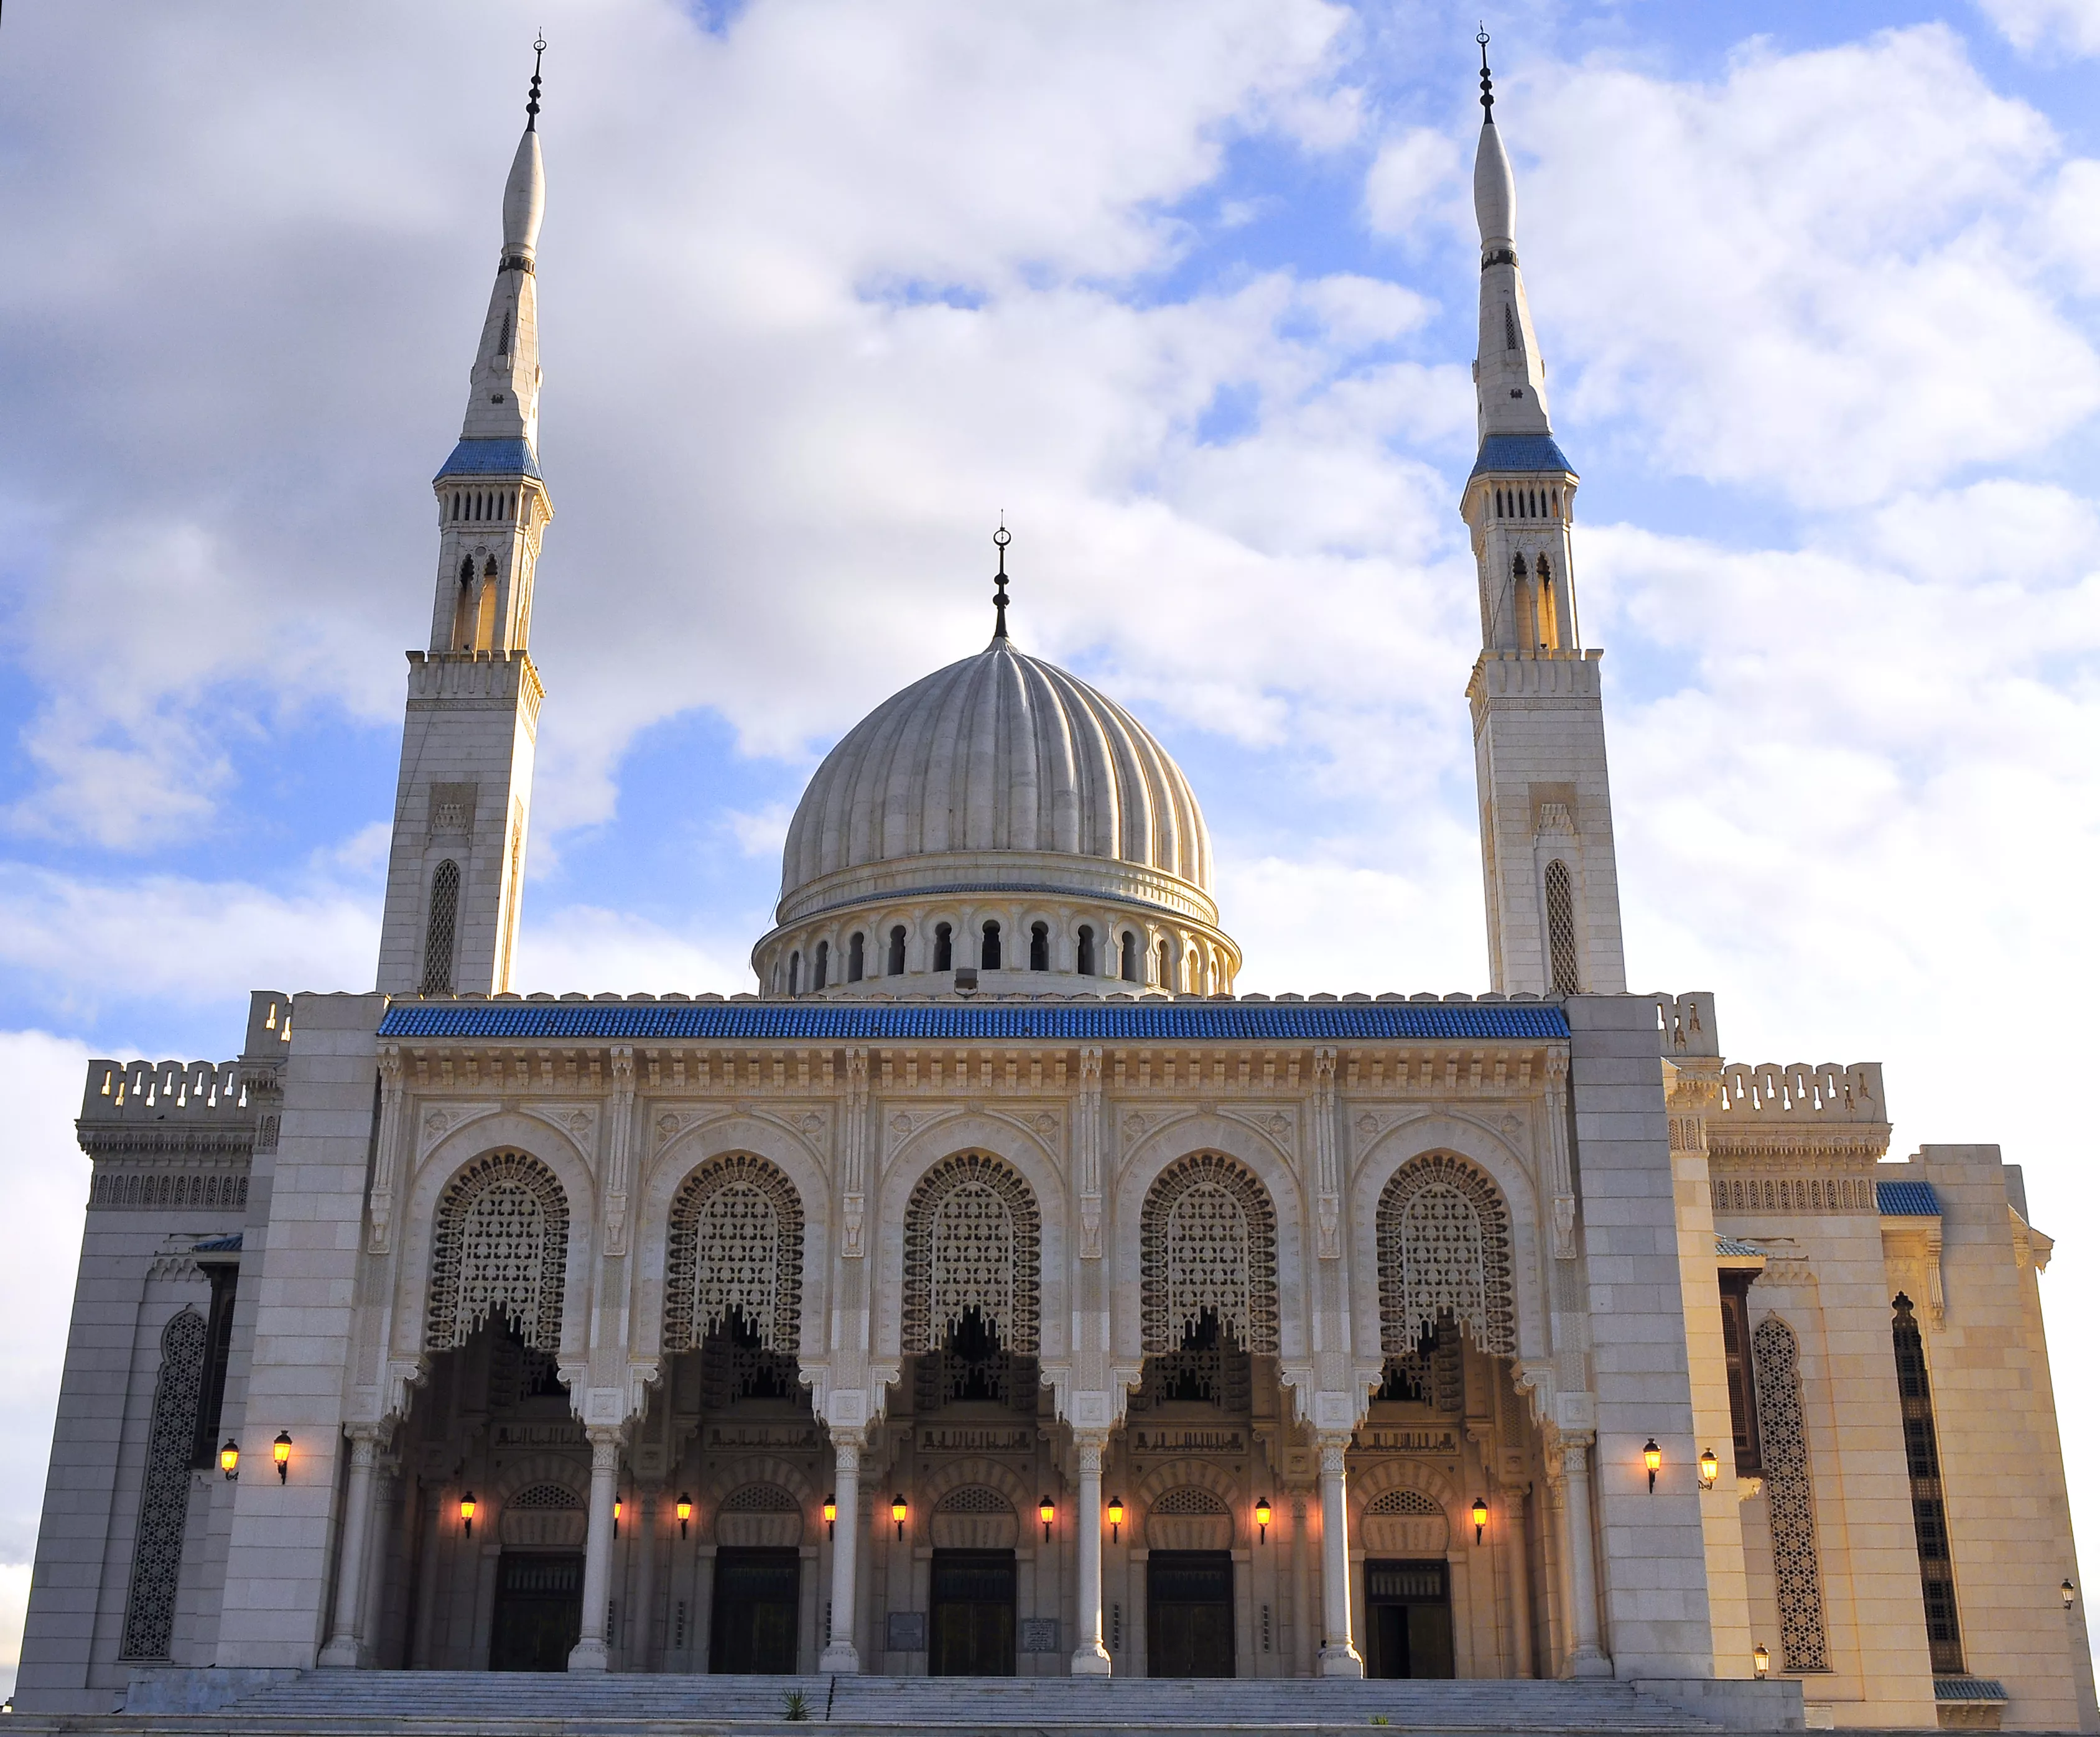 Prince Abdel Kader Mosque in Algeria, Africa | Architecture - Rated 3.9